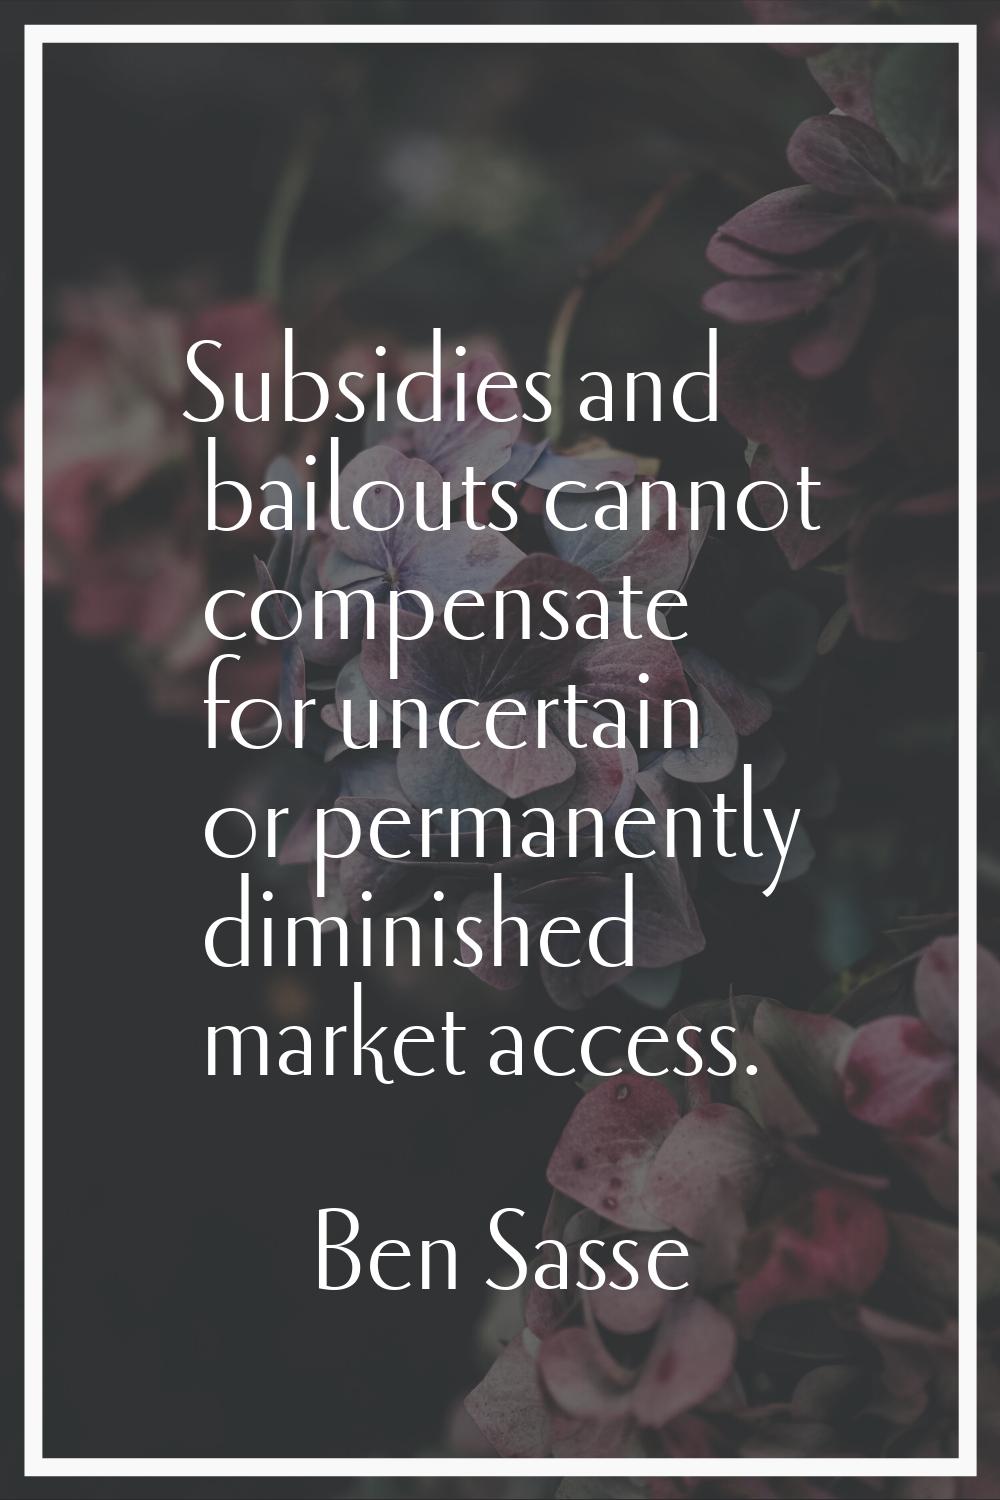 Subsidies and bailouts cannot compensate for uncertain or permanently diminished market access.